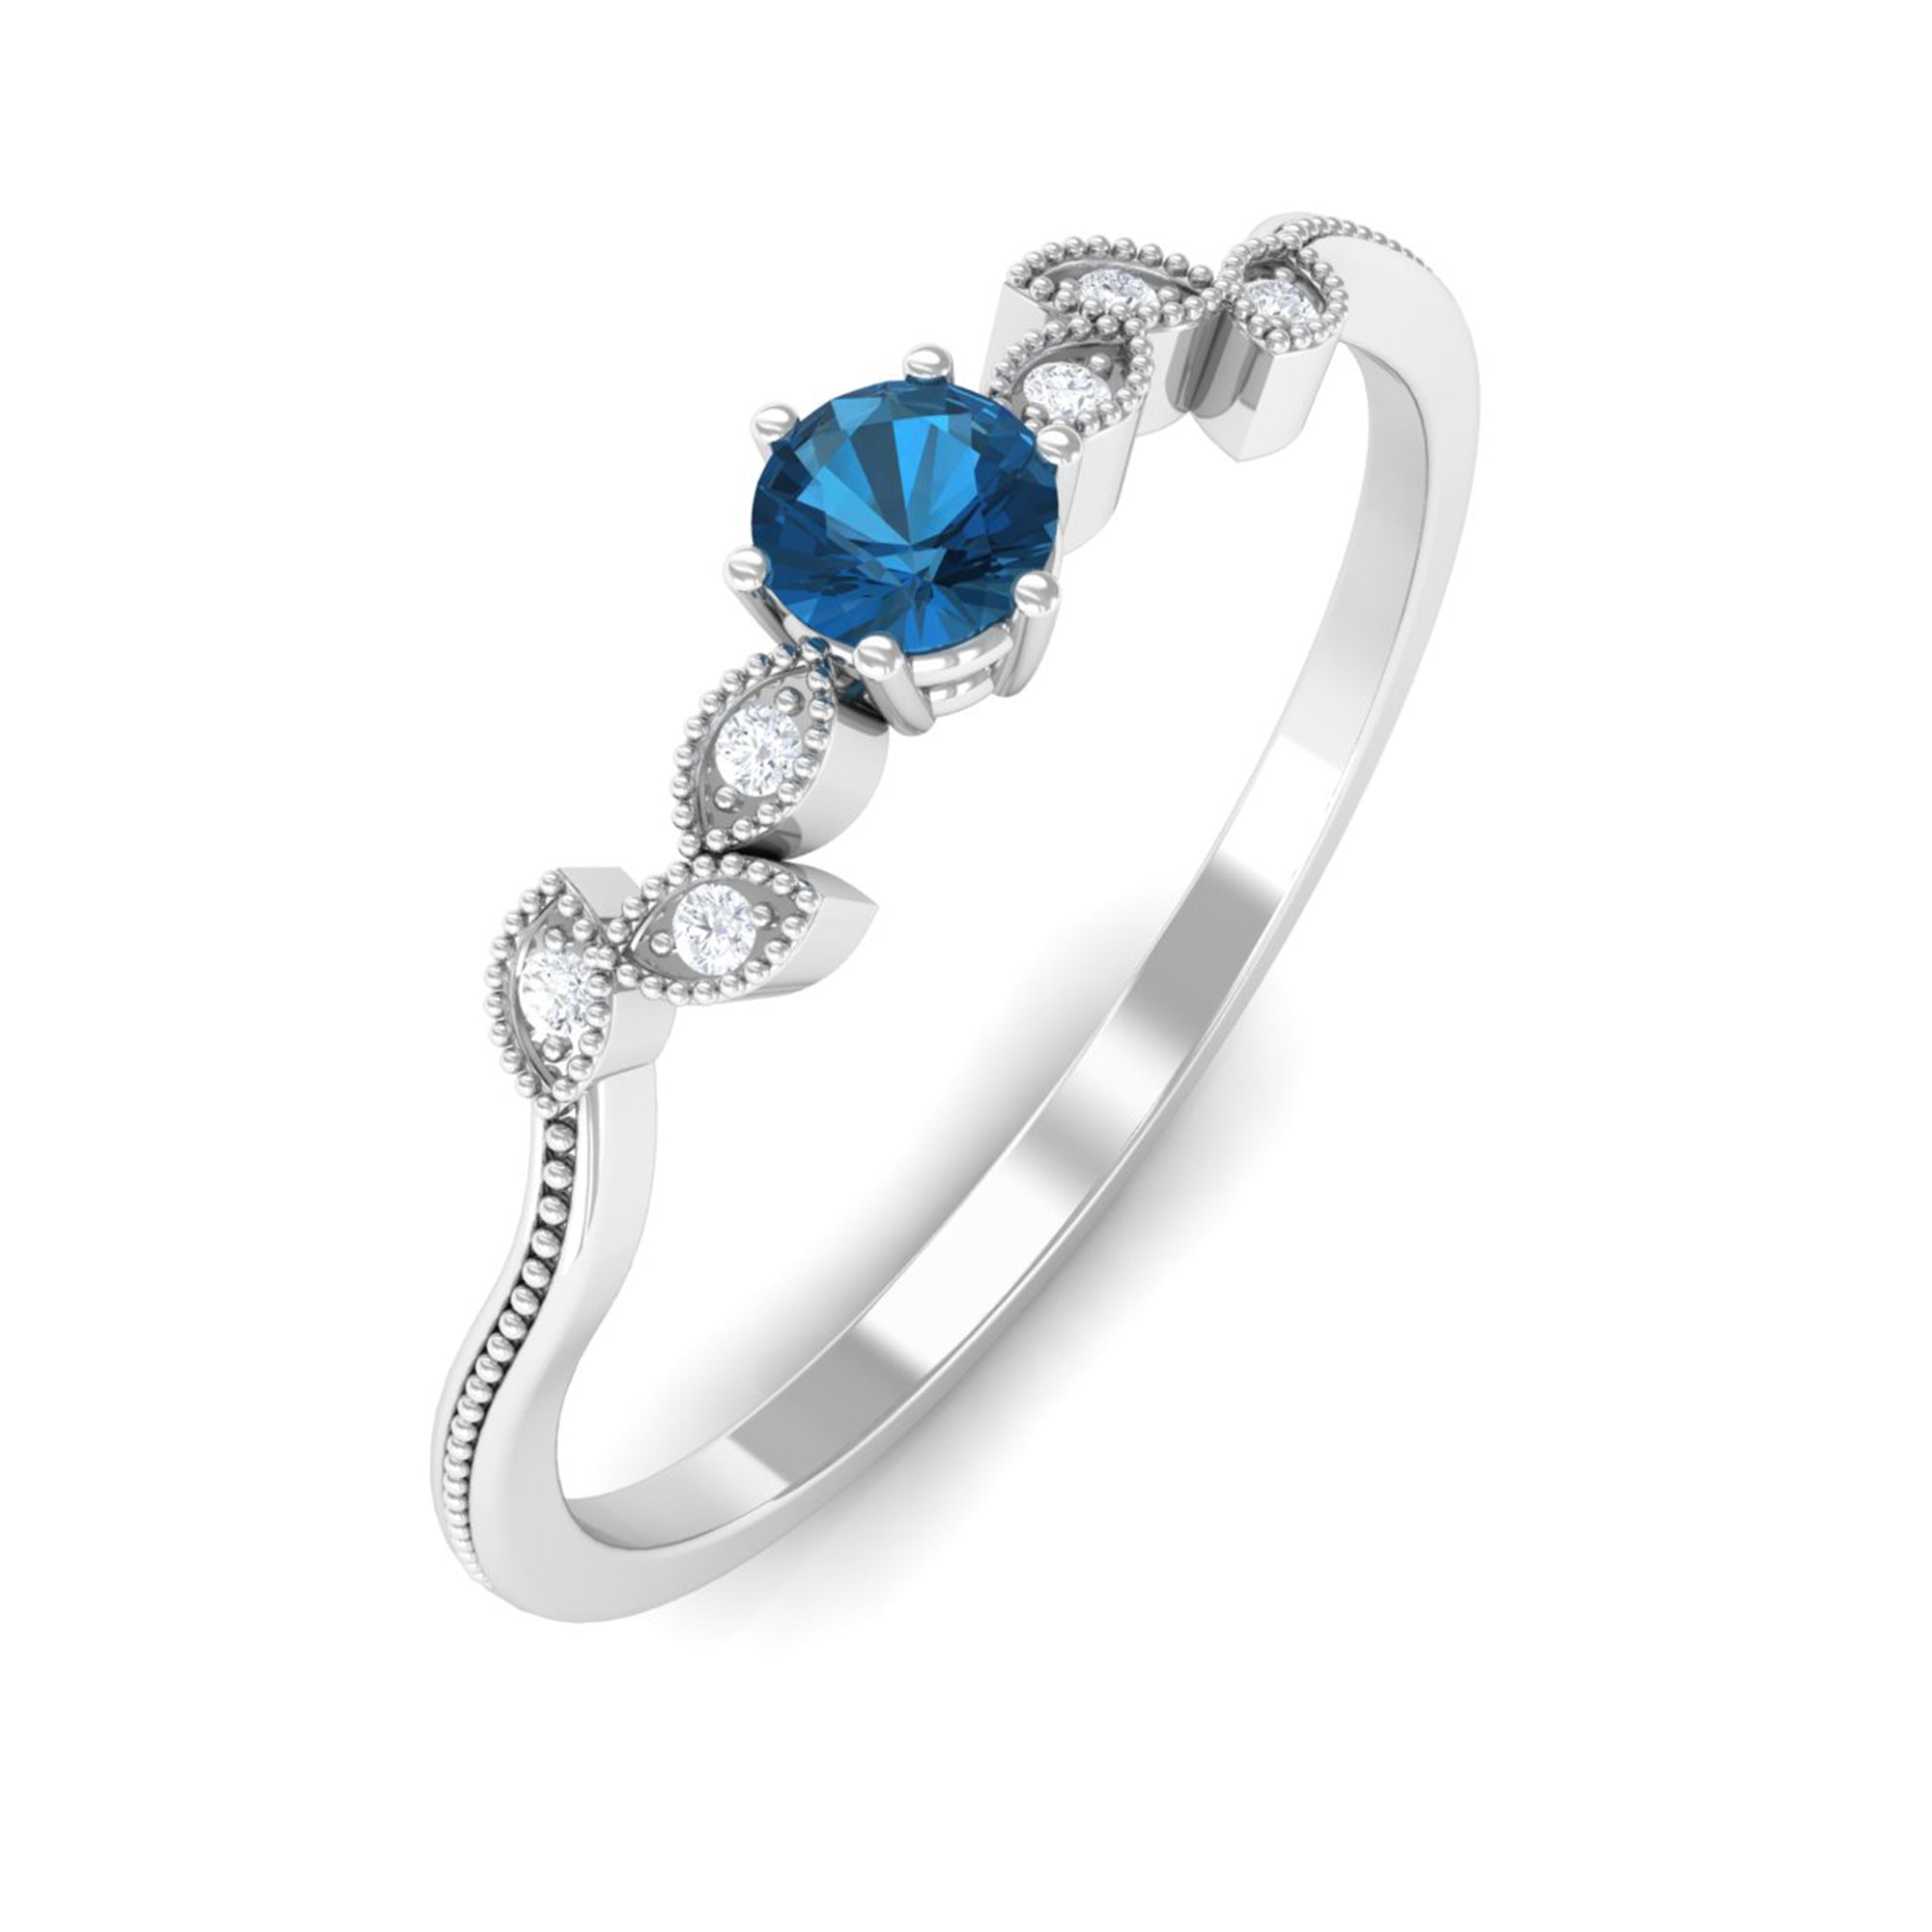 London Blue Topaz Leaf Inspired Solitaire Promise Ring with Beaded Details London Blue Topaz - ( AAA ) - Quality - Rosec Jewels